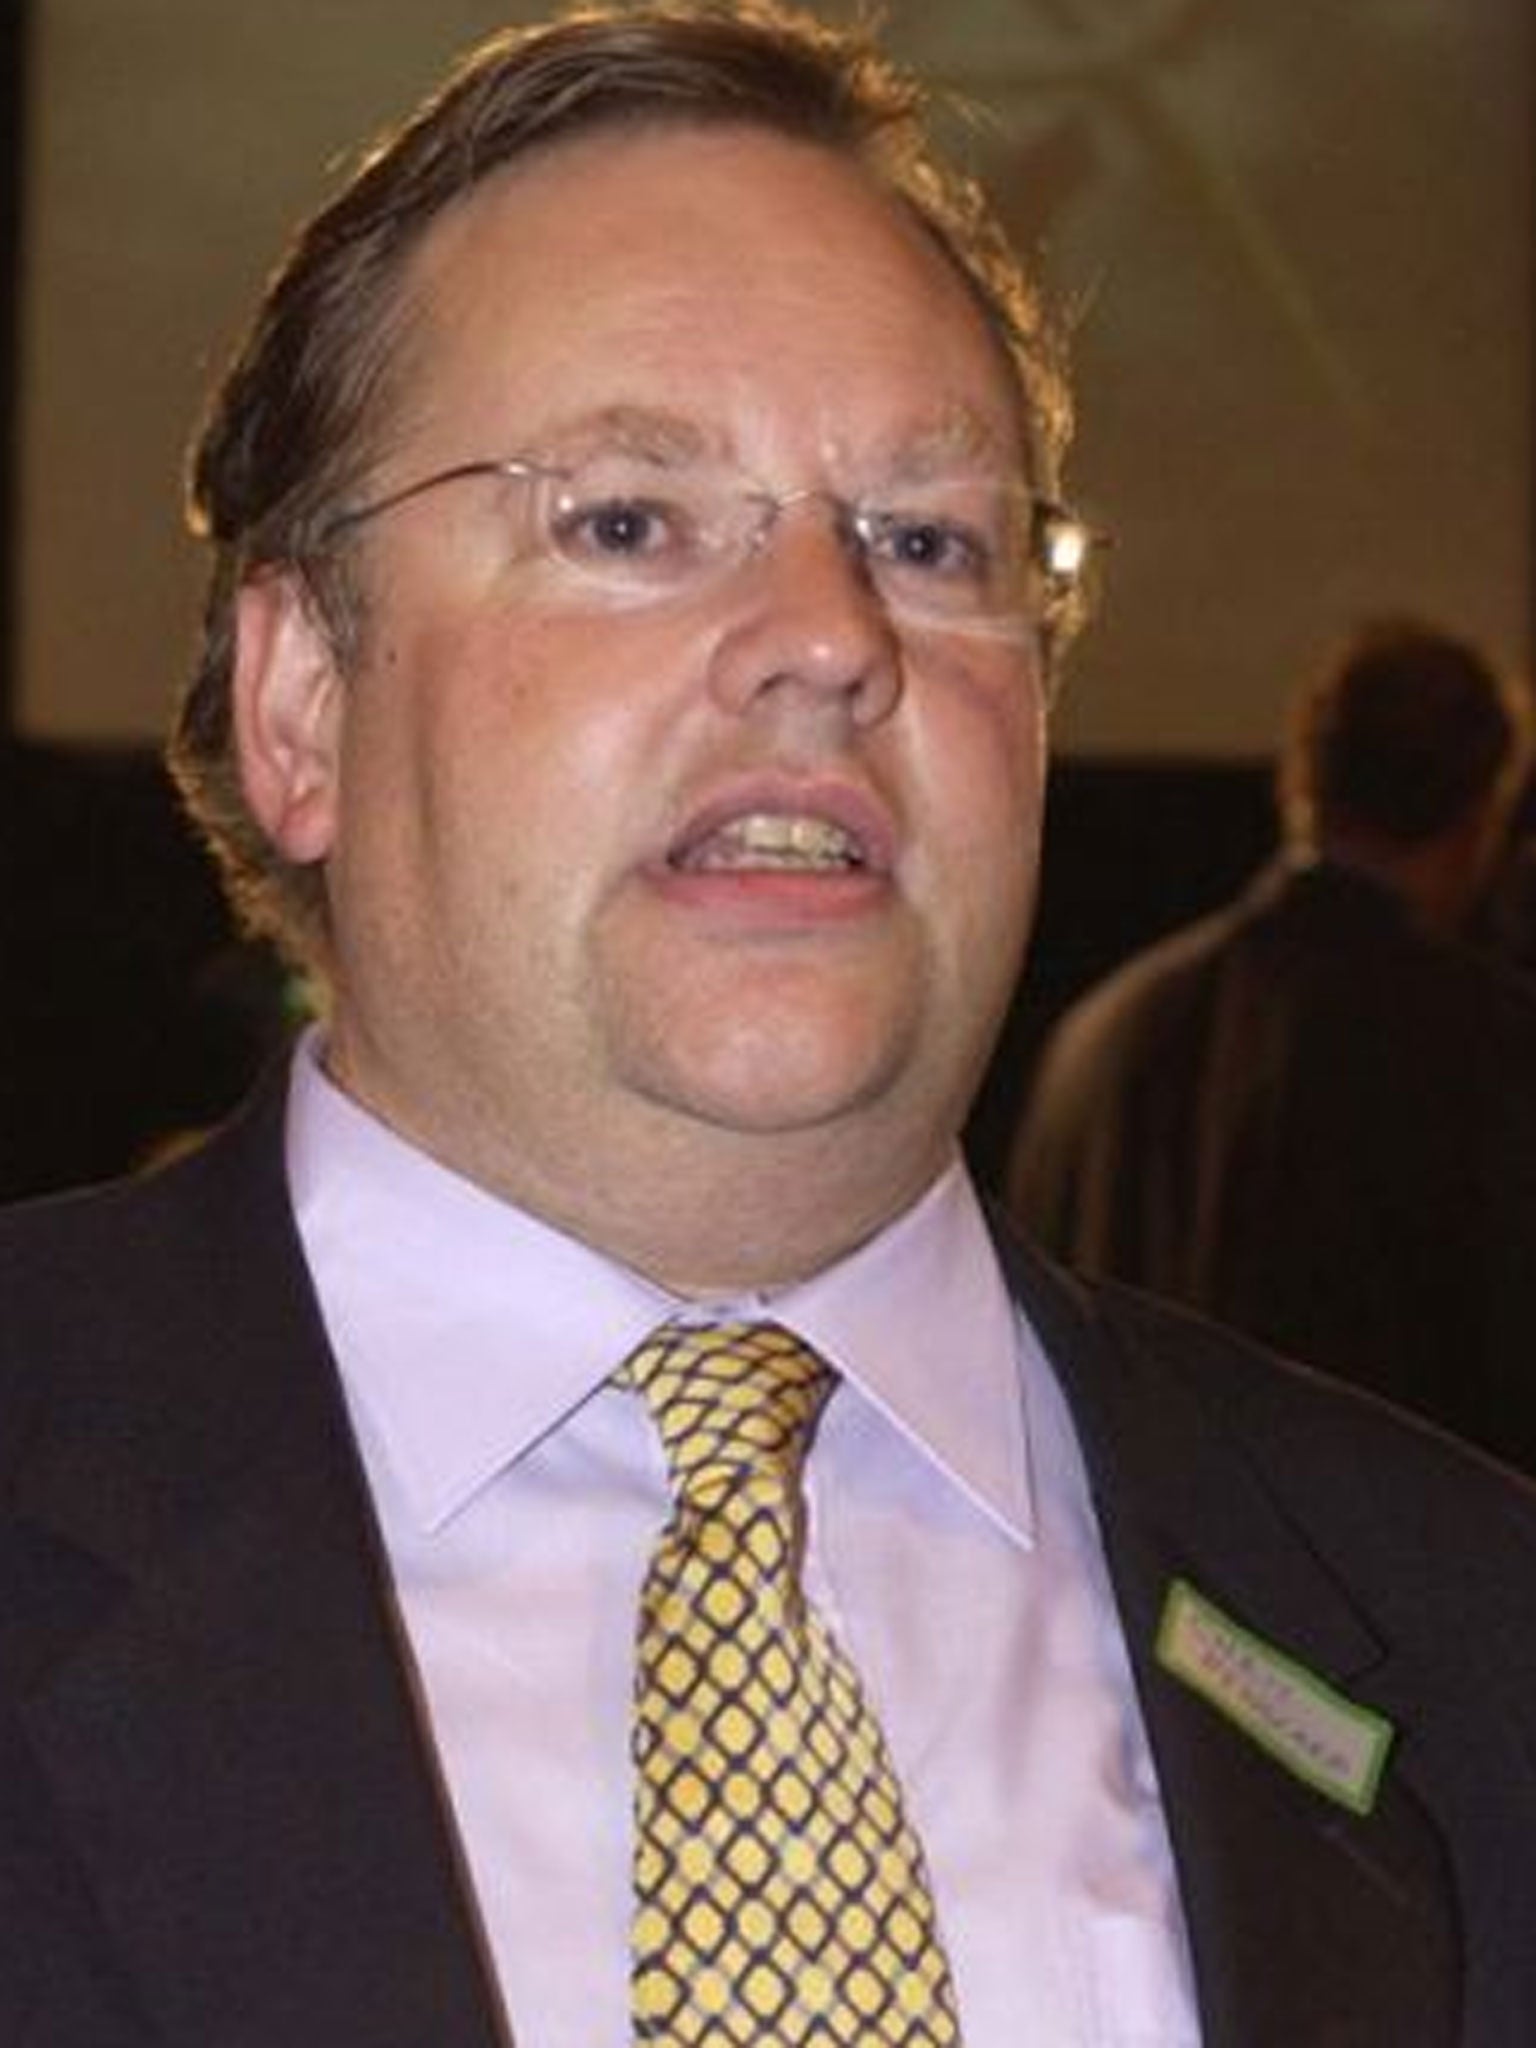 Lord Rennard played a pivotal role in Nick Clegg’s rise but now might reveal the sexual misconduct allegations engulfing the peer